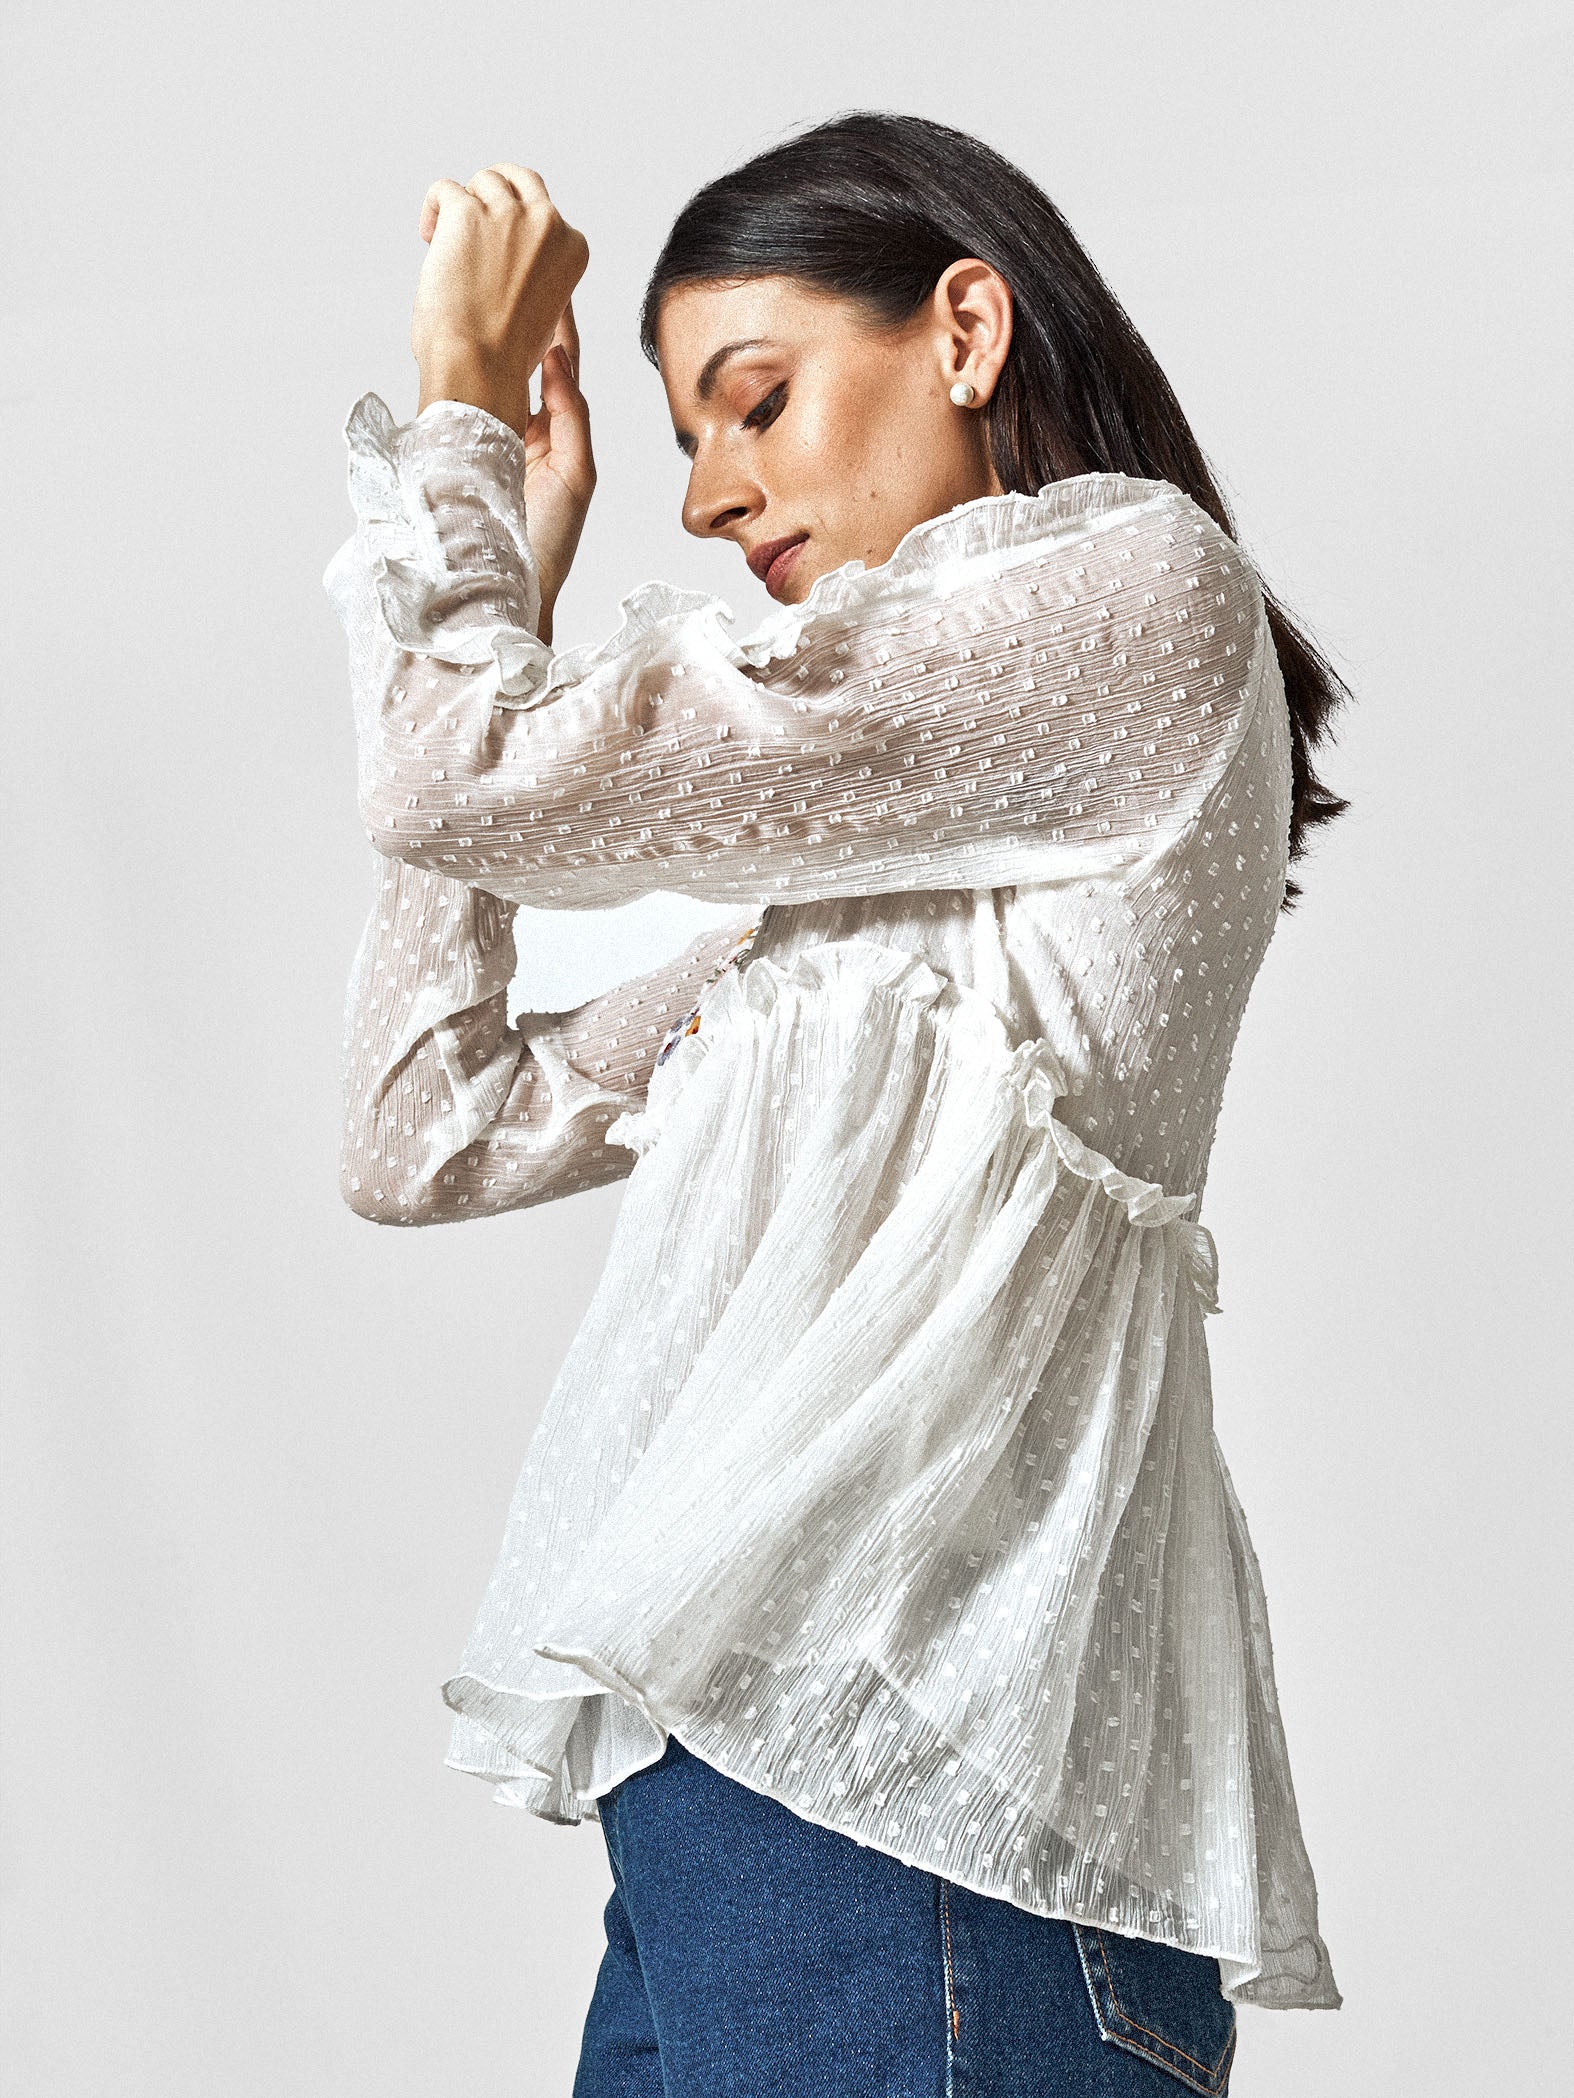 White Embroidered Ruffle Top